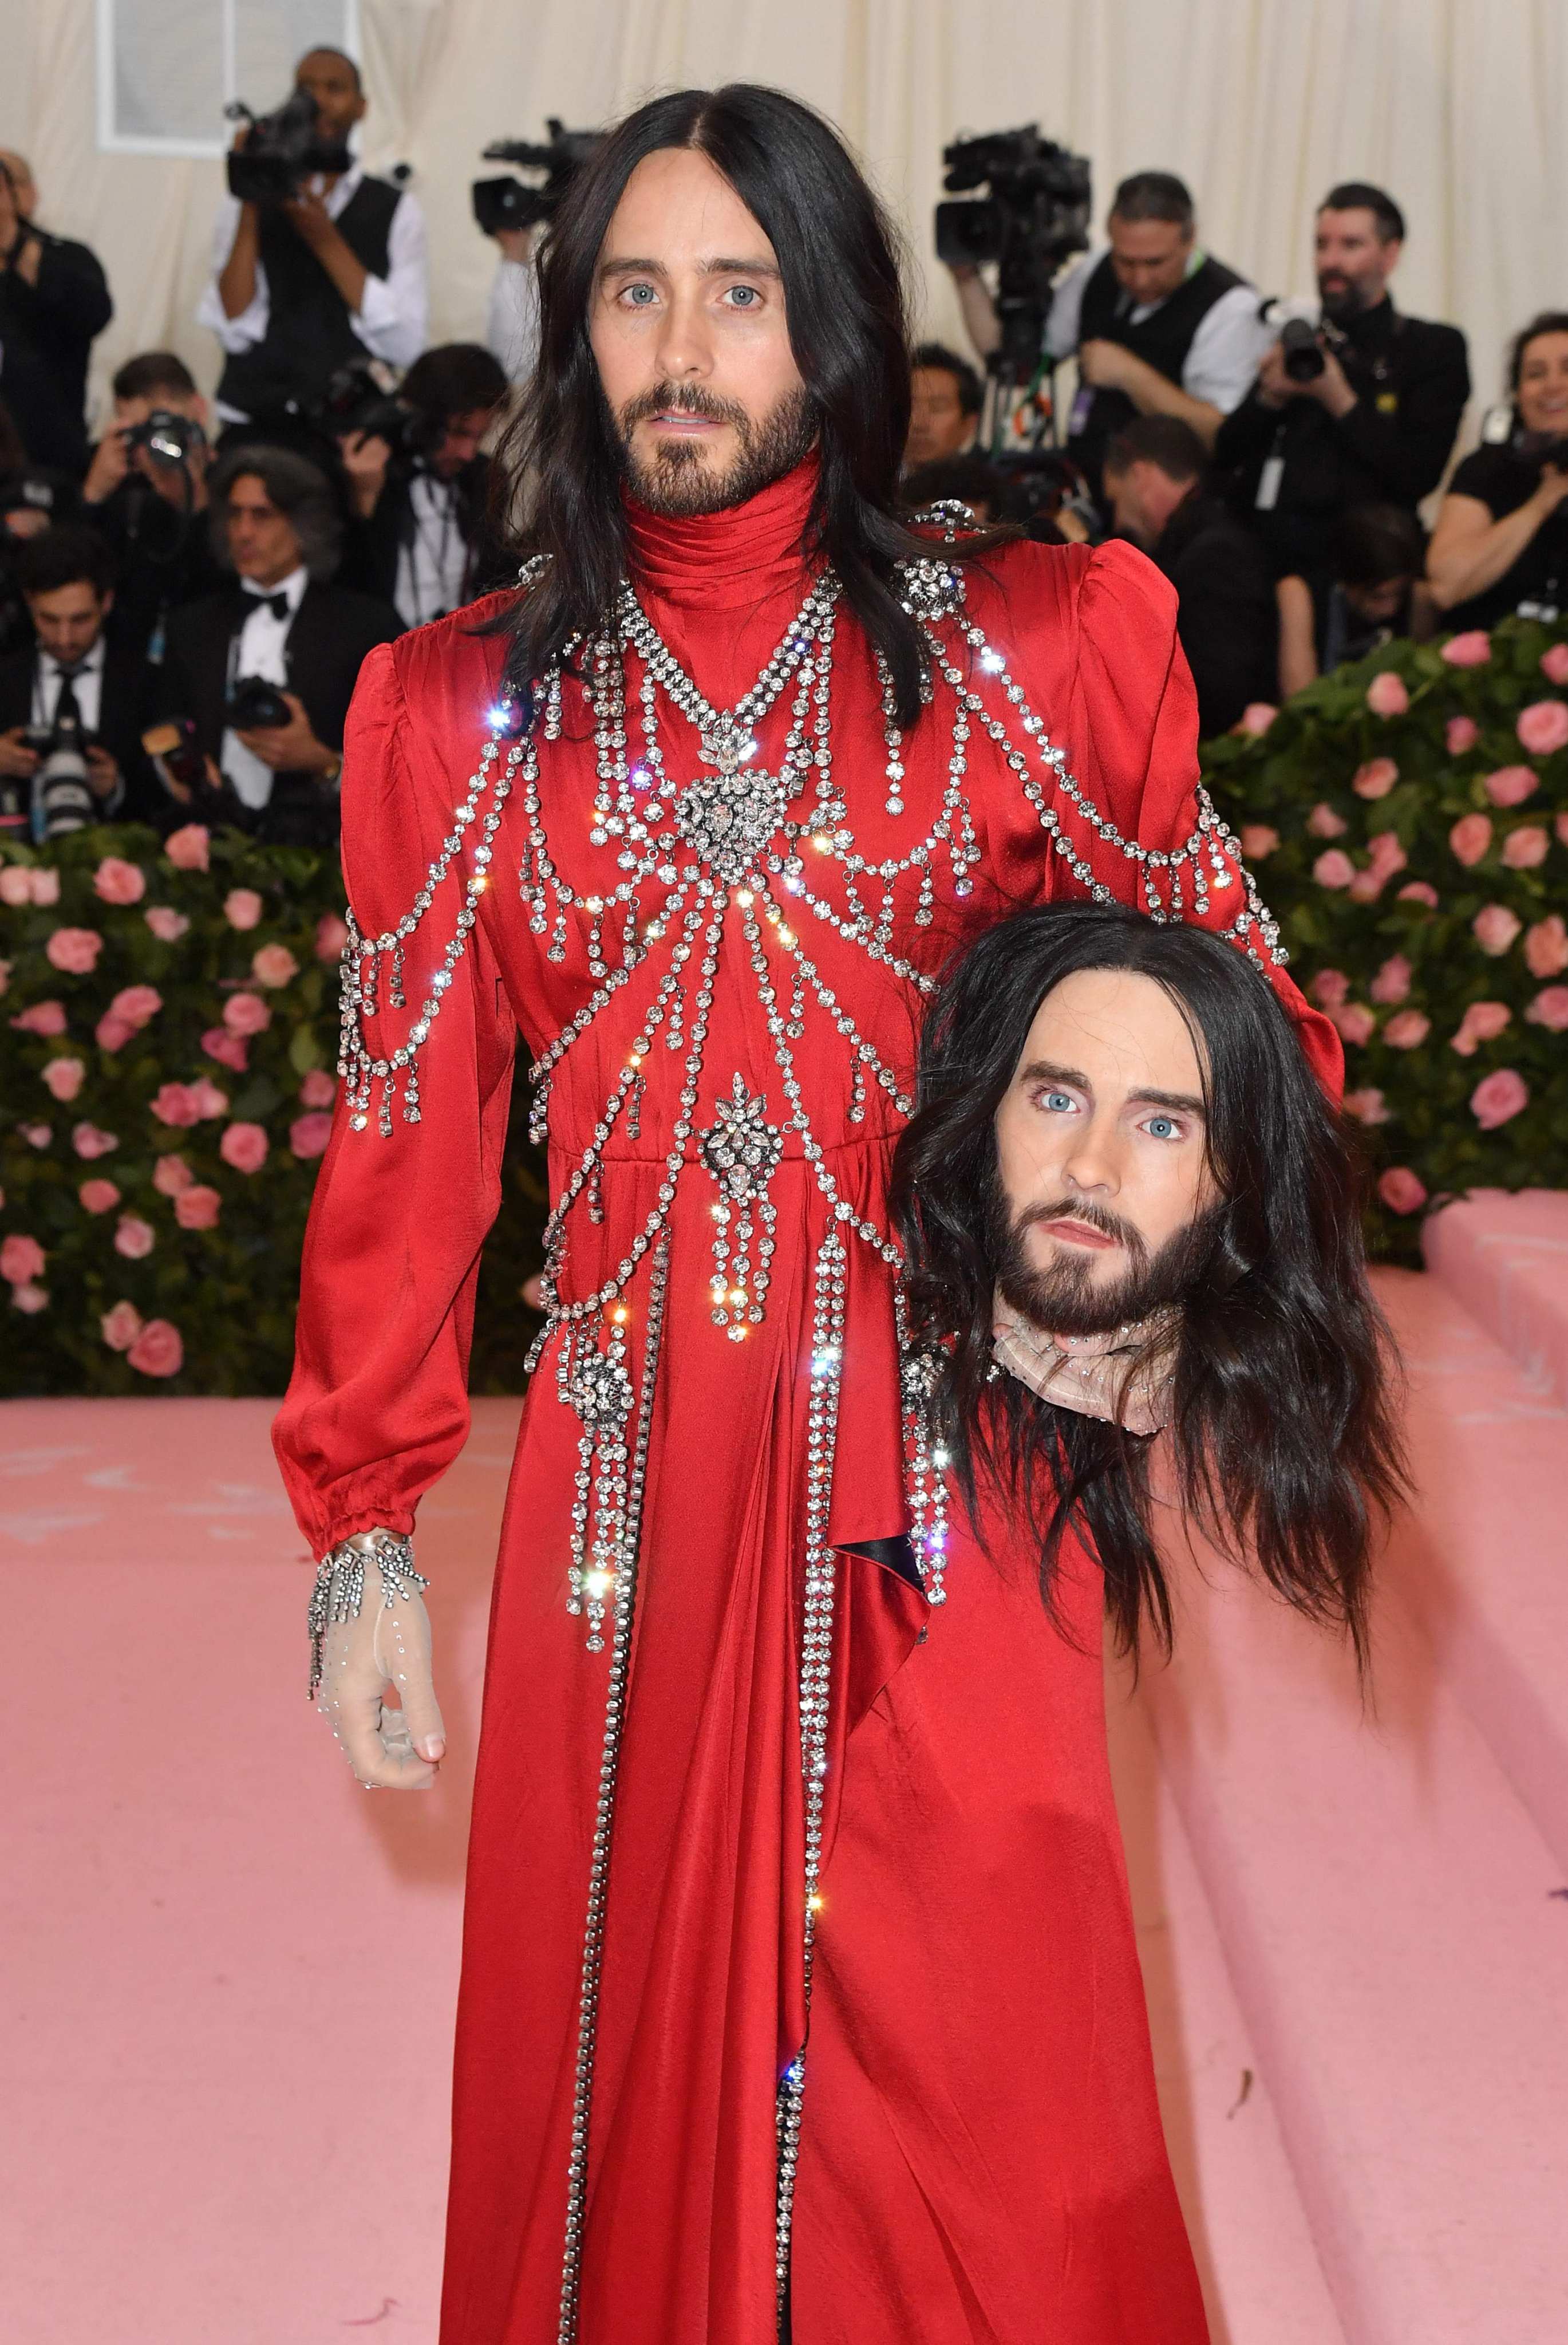 Jared Leto pursues his careers in acting and music in an all-or-nothing fashion that has won him awards and much praise, but has also been controversial at times and even damaged his health. Photo: Agence France-Presse